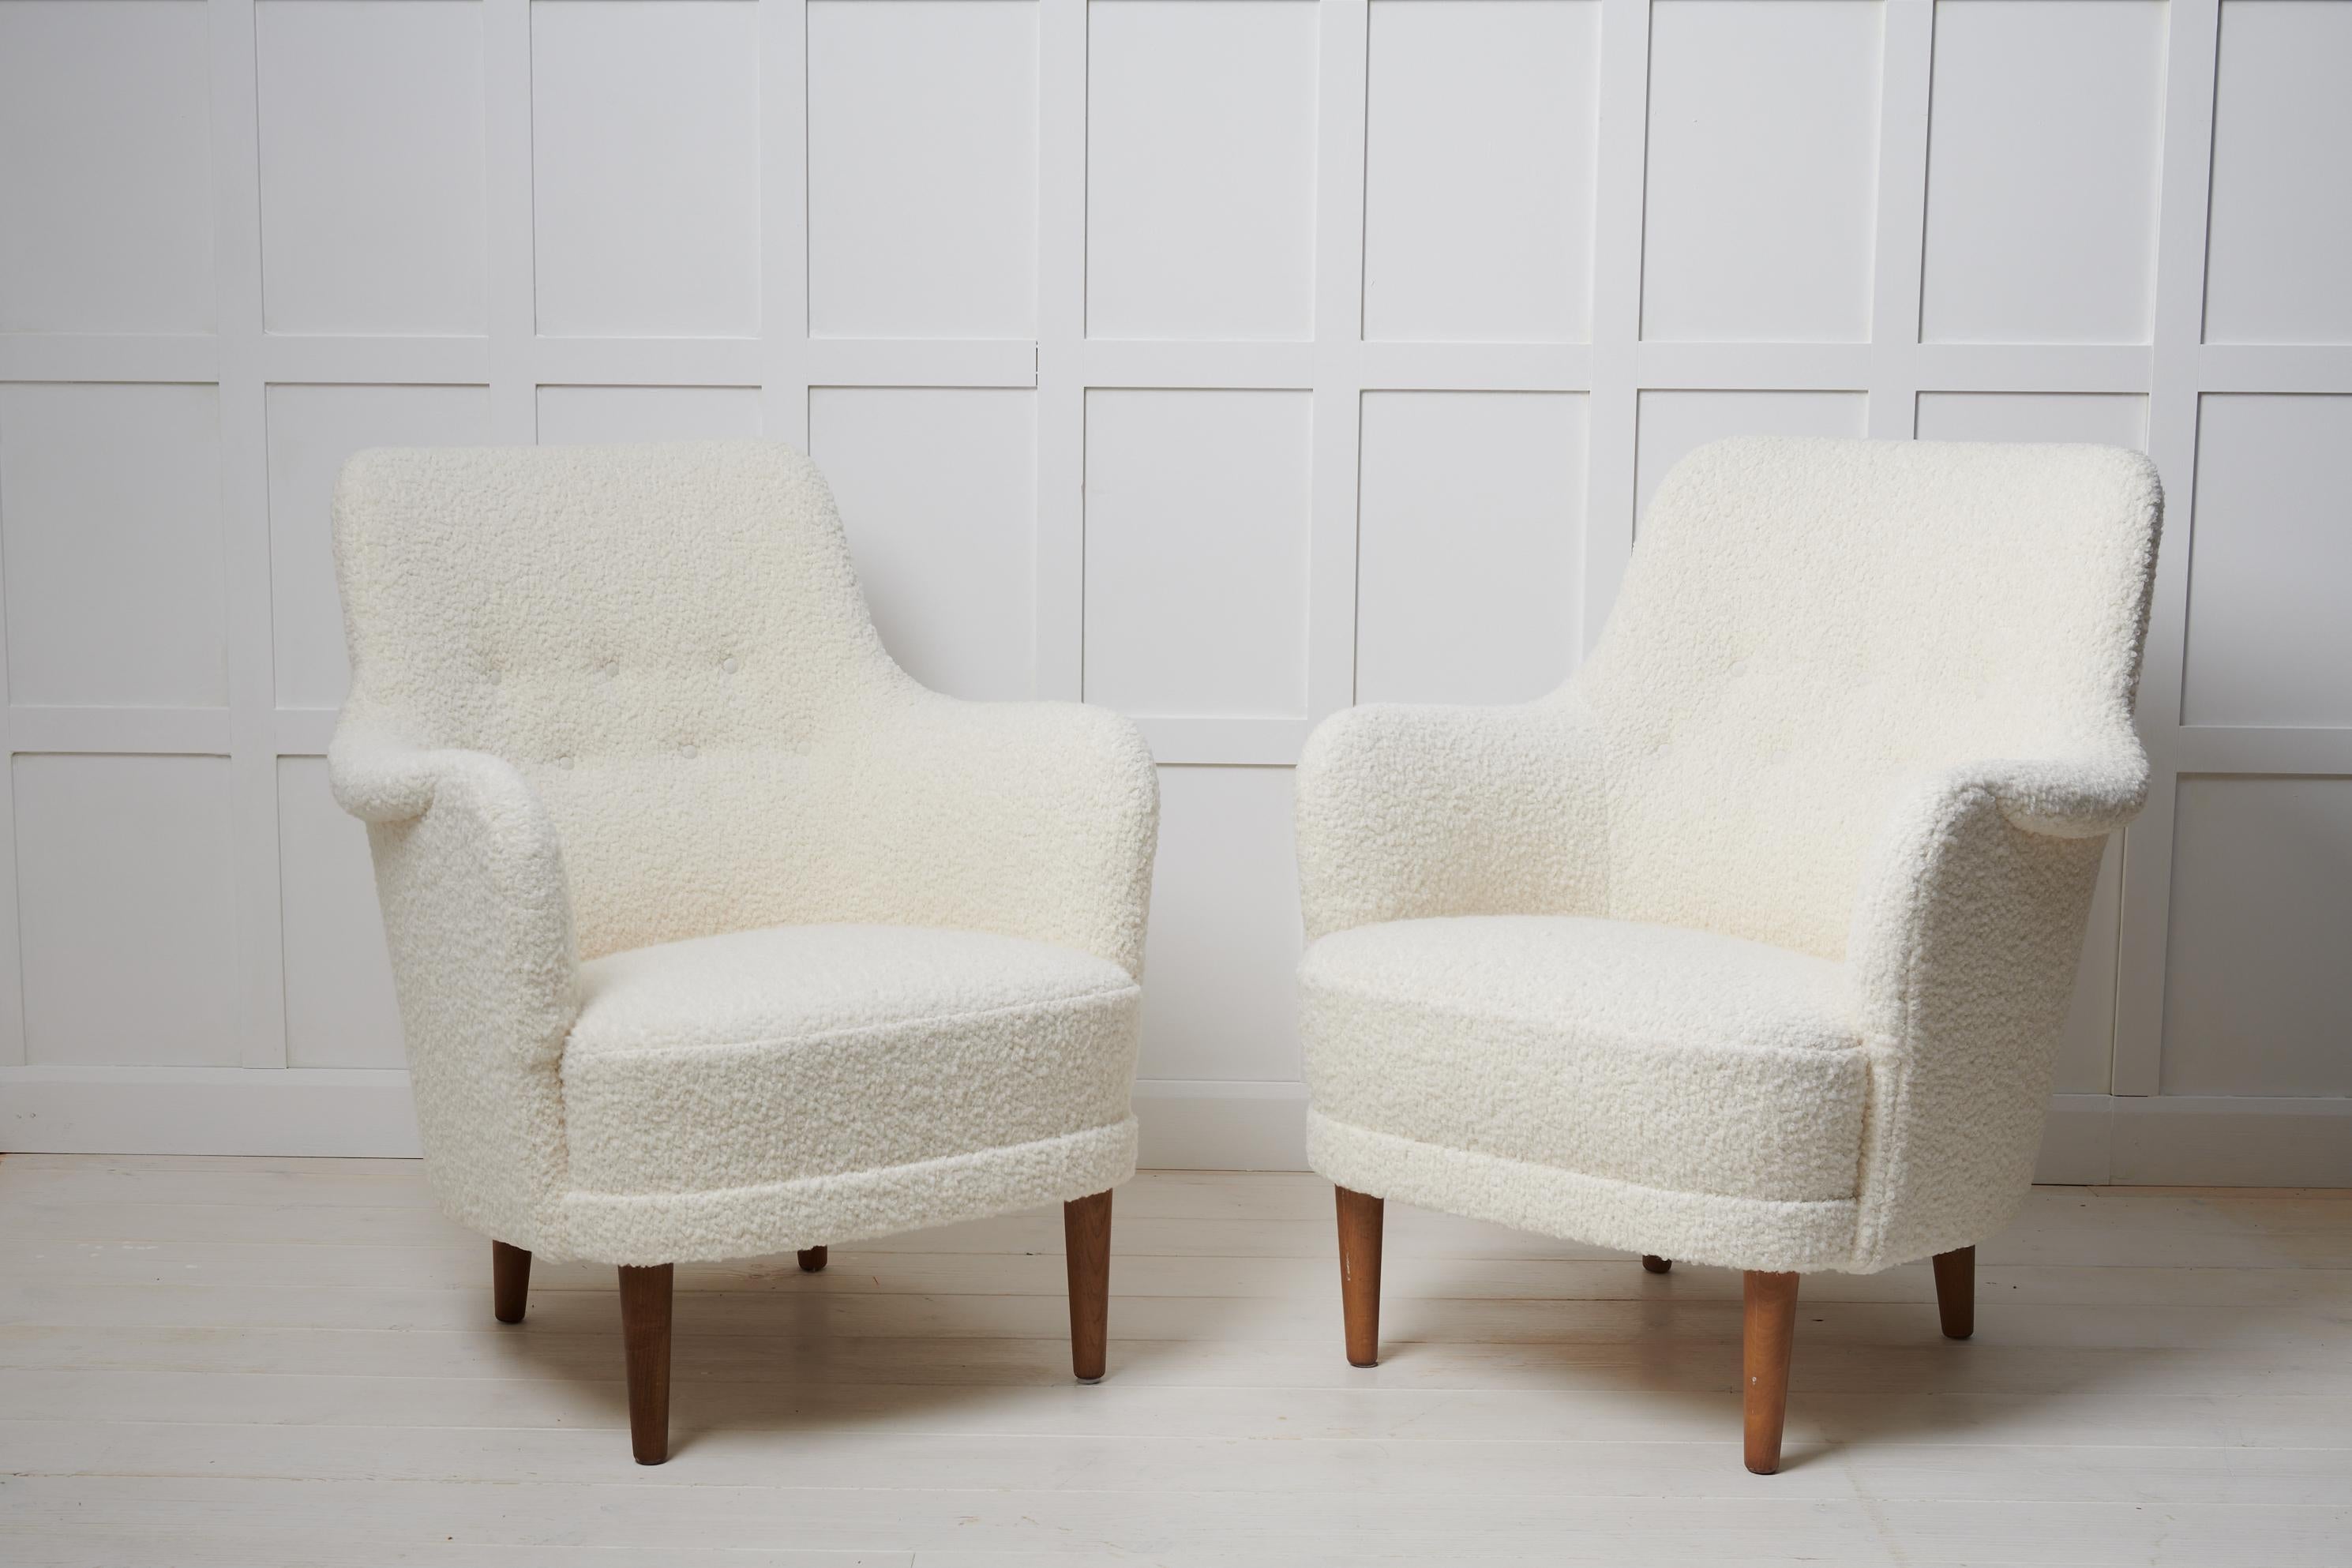 Carl Malmsten Samsas armchairs for O.H. Sjögren from the mid 20th century. The chairs are a Swedish modern classic and the Samsas series is today recognised as the most characteristic designs from Malmsten. The armchairs Samsas is a 1960s favourite